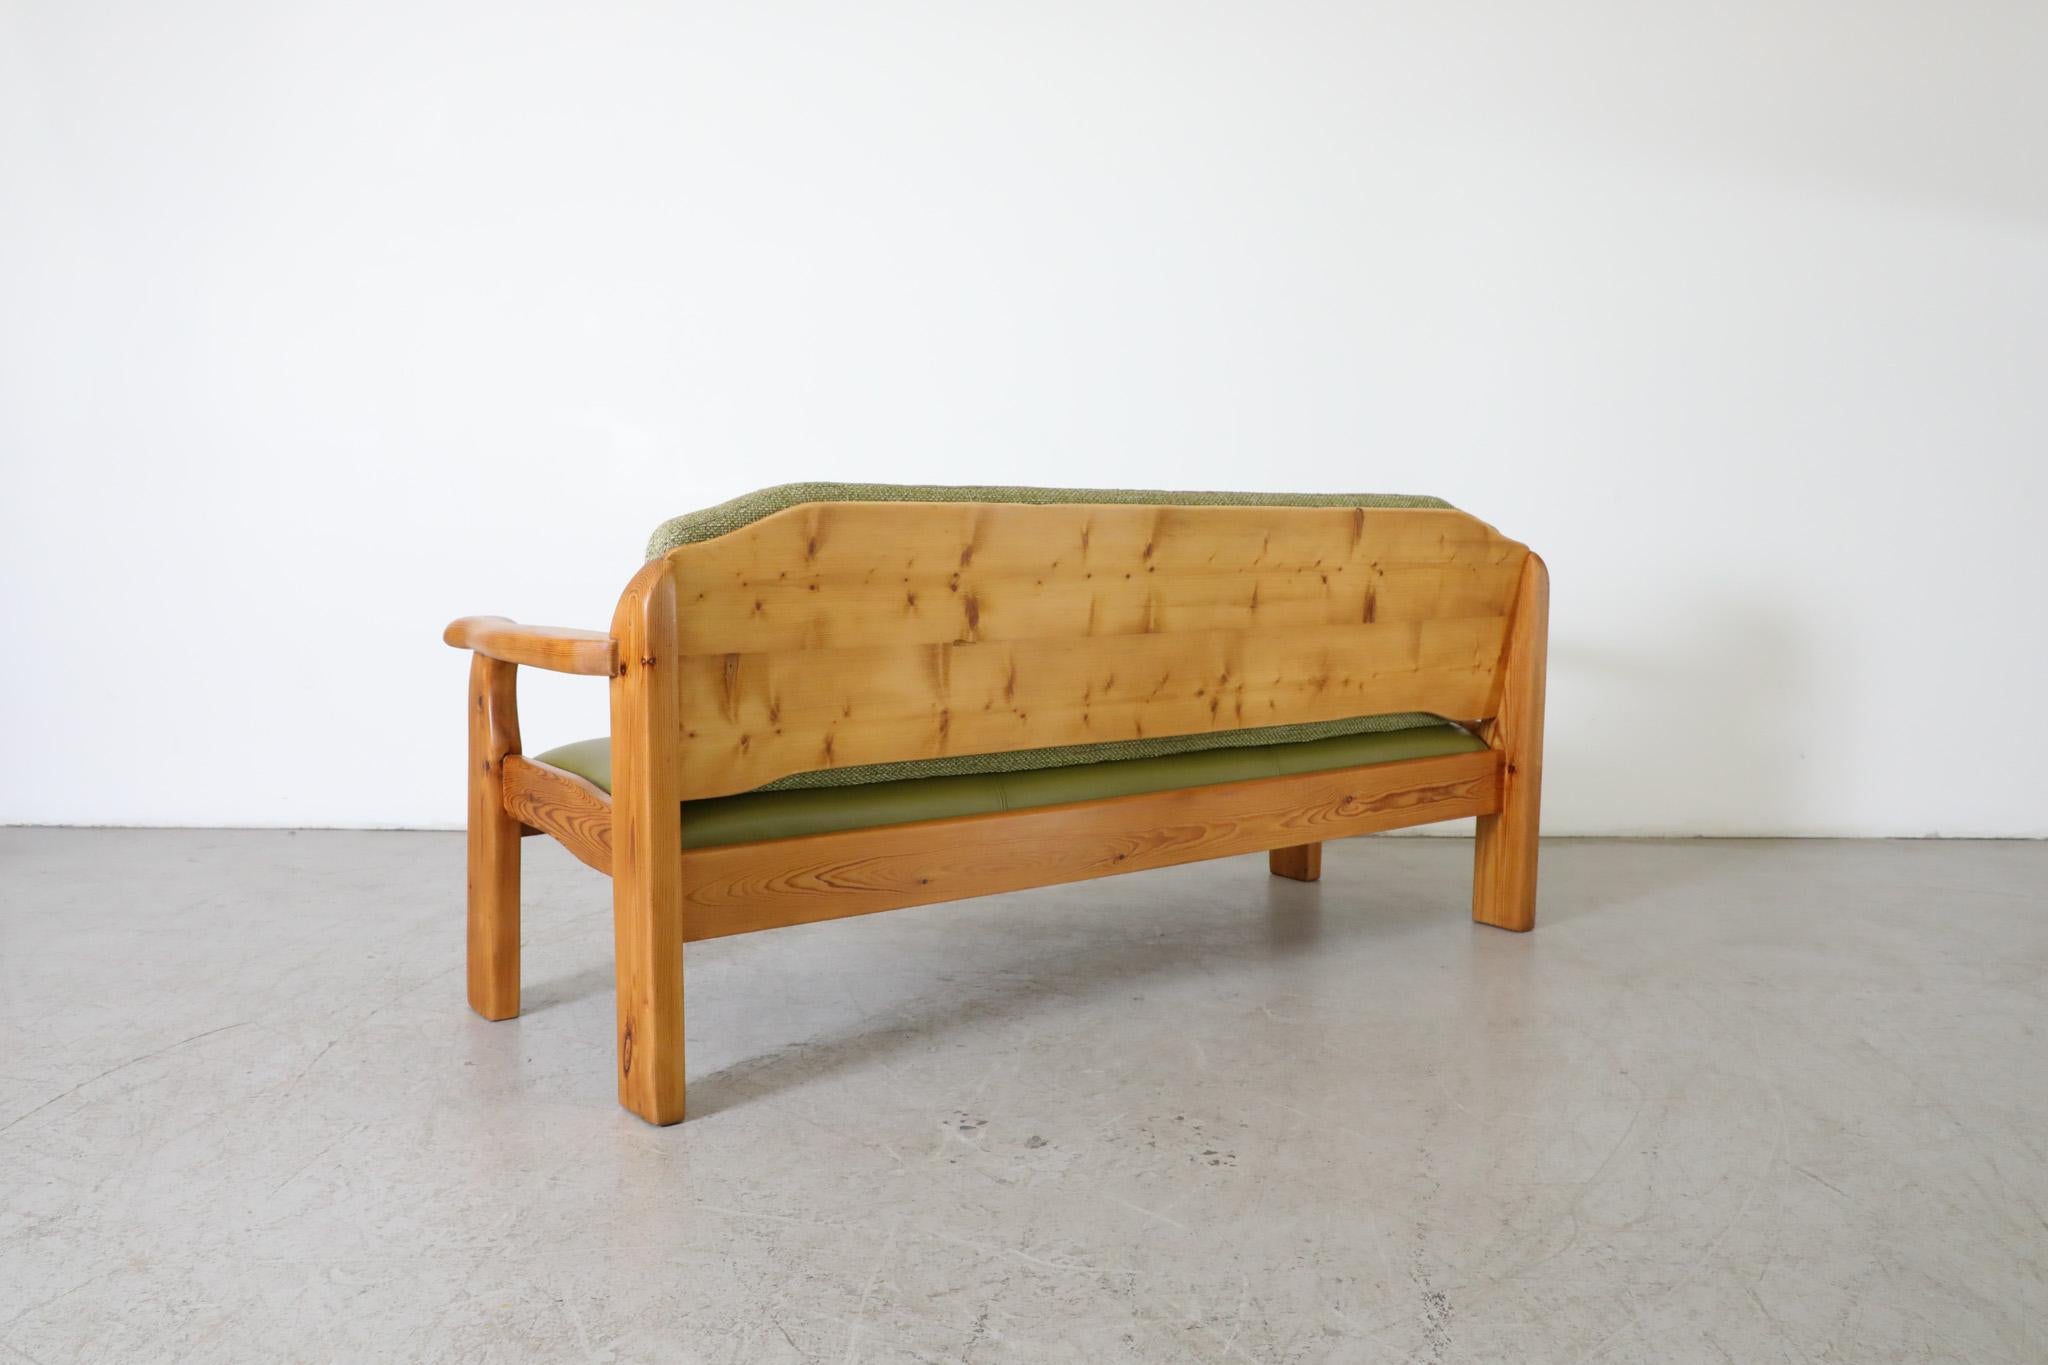 Mid-20th Century Ate van Apeldoorn Inspired Pine Bench with Green Cushions & Hand Carved Details For Sale